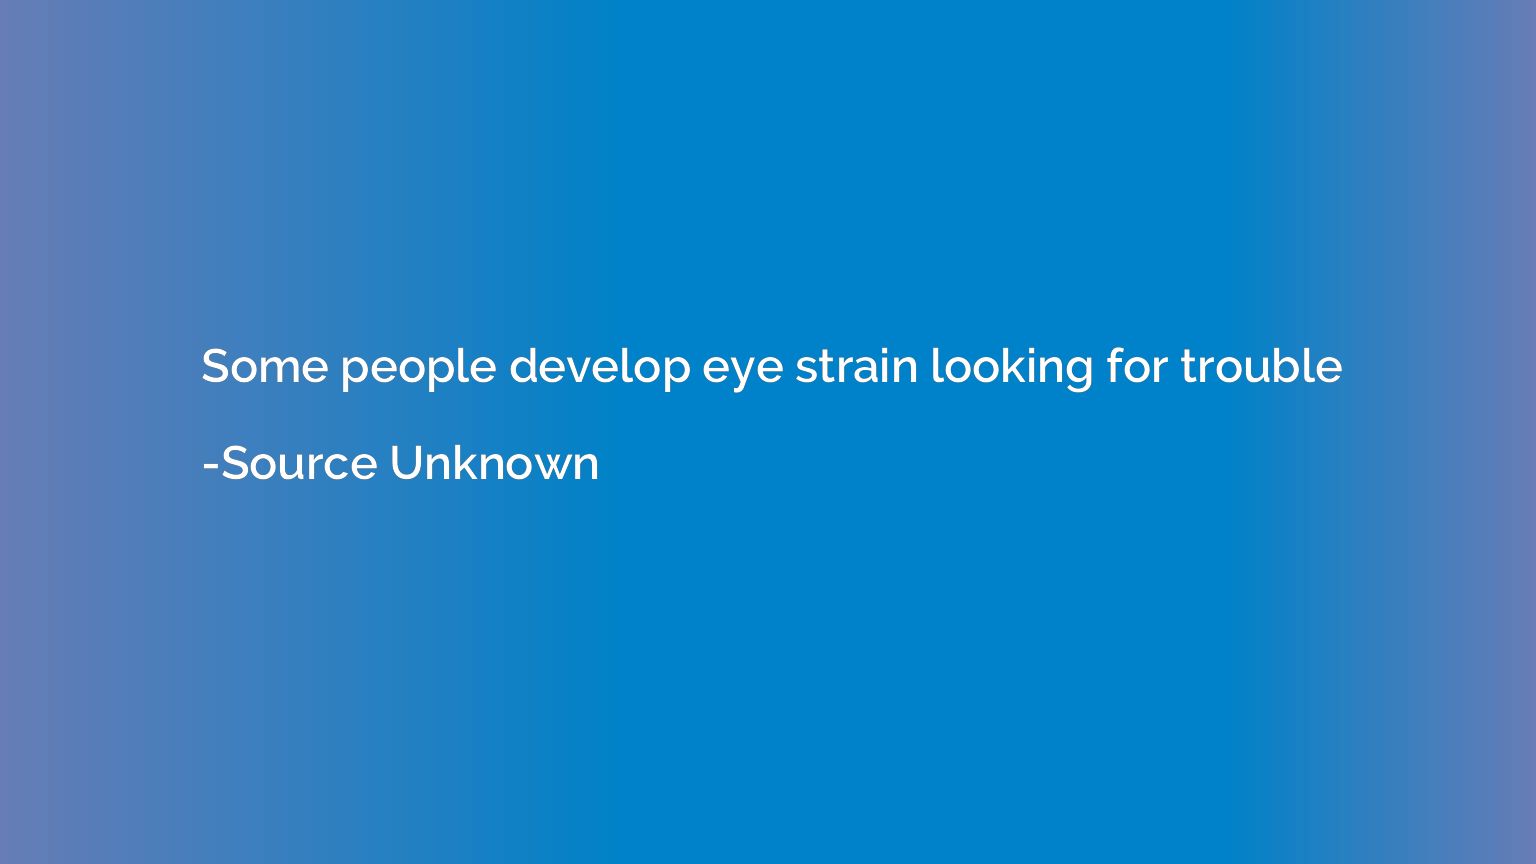 Some people develop eye strain looking for trouble